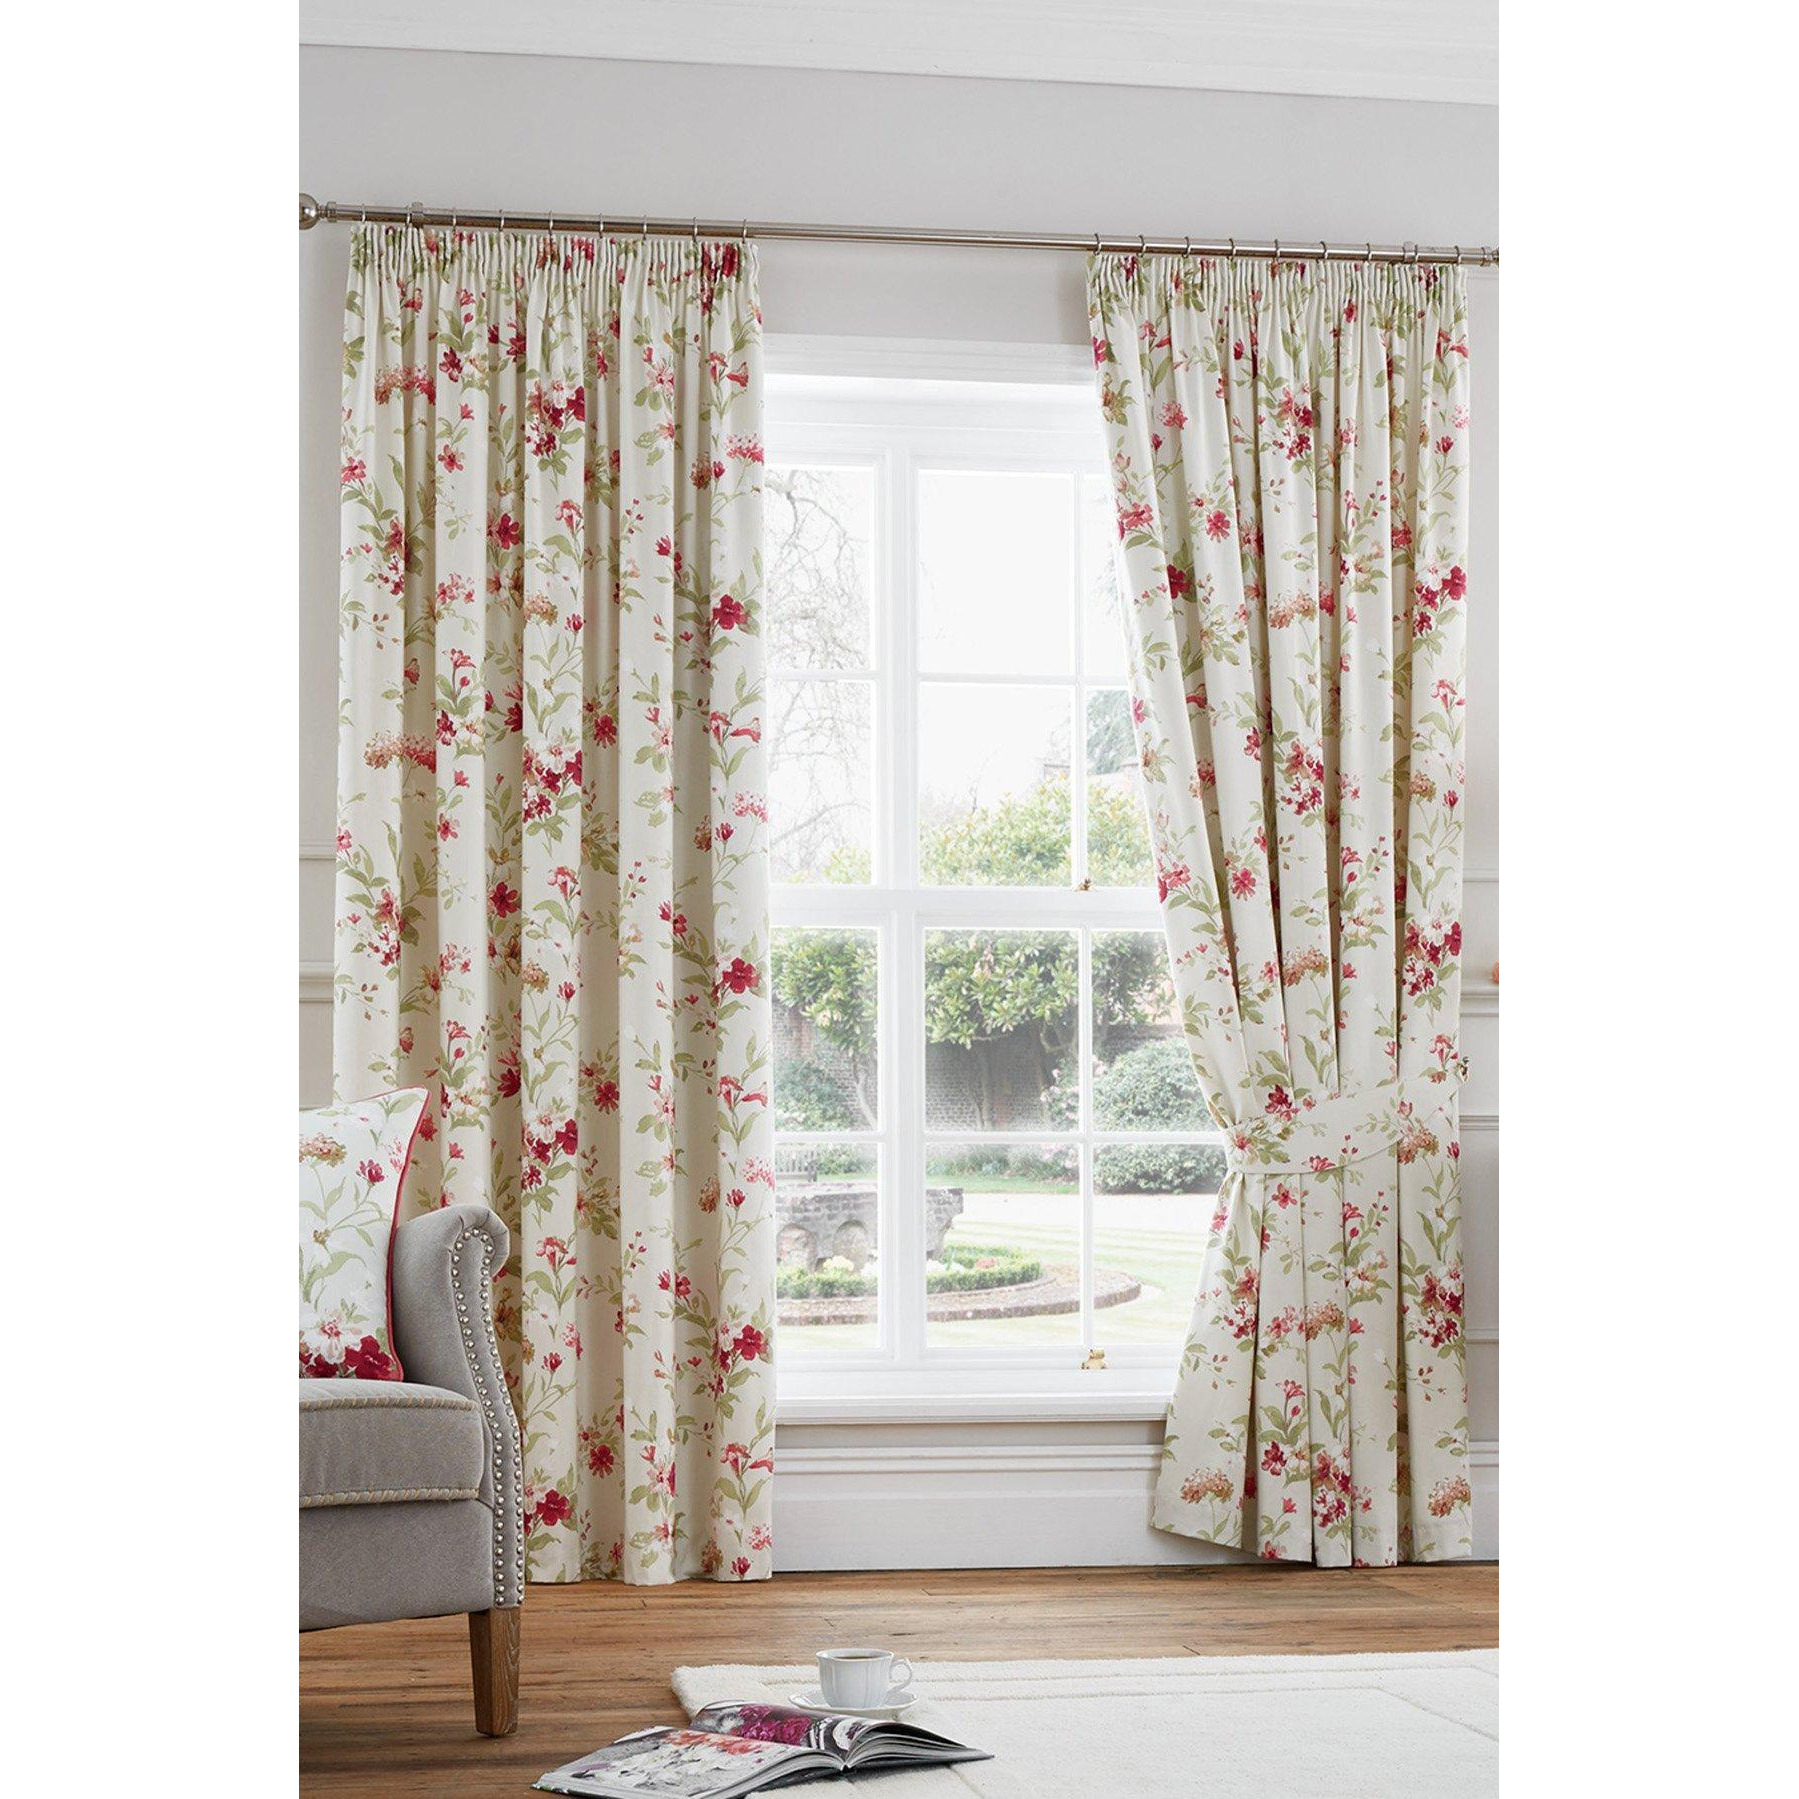 'Jeannie' 100% Cotton Light Filtering Pair of Pencil Pleat Curtains - image 1